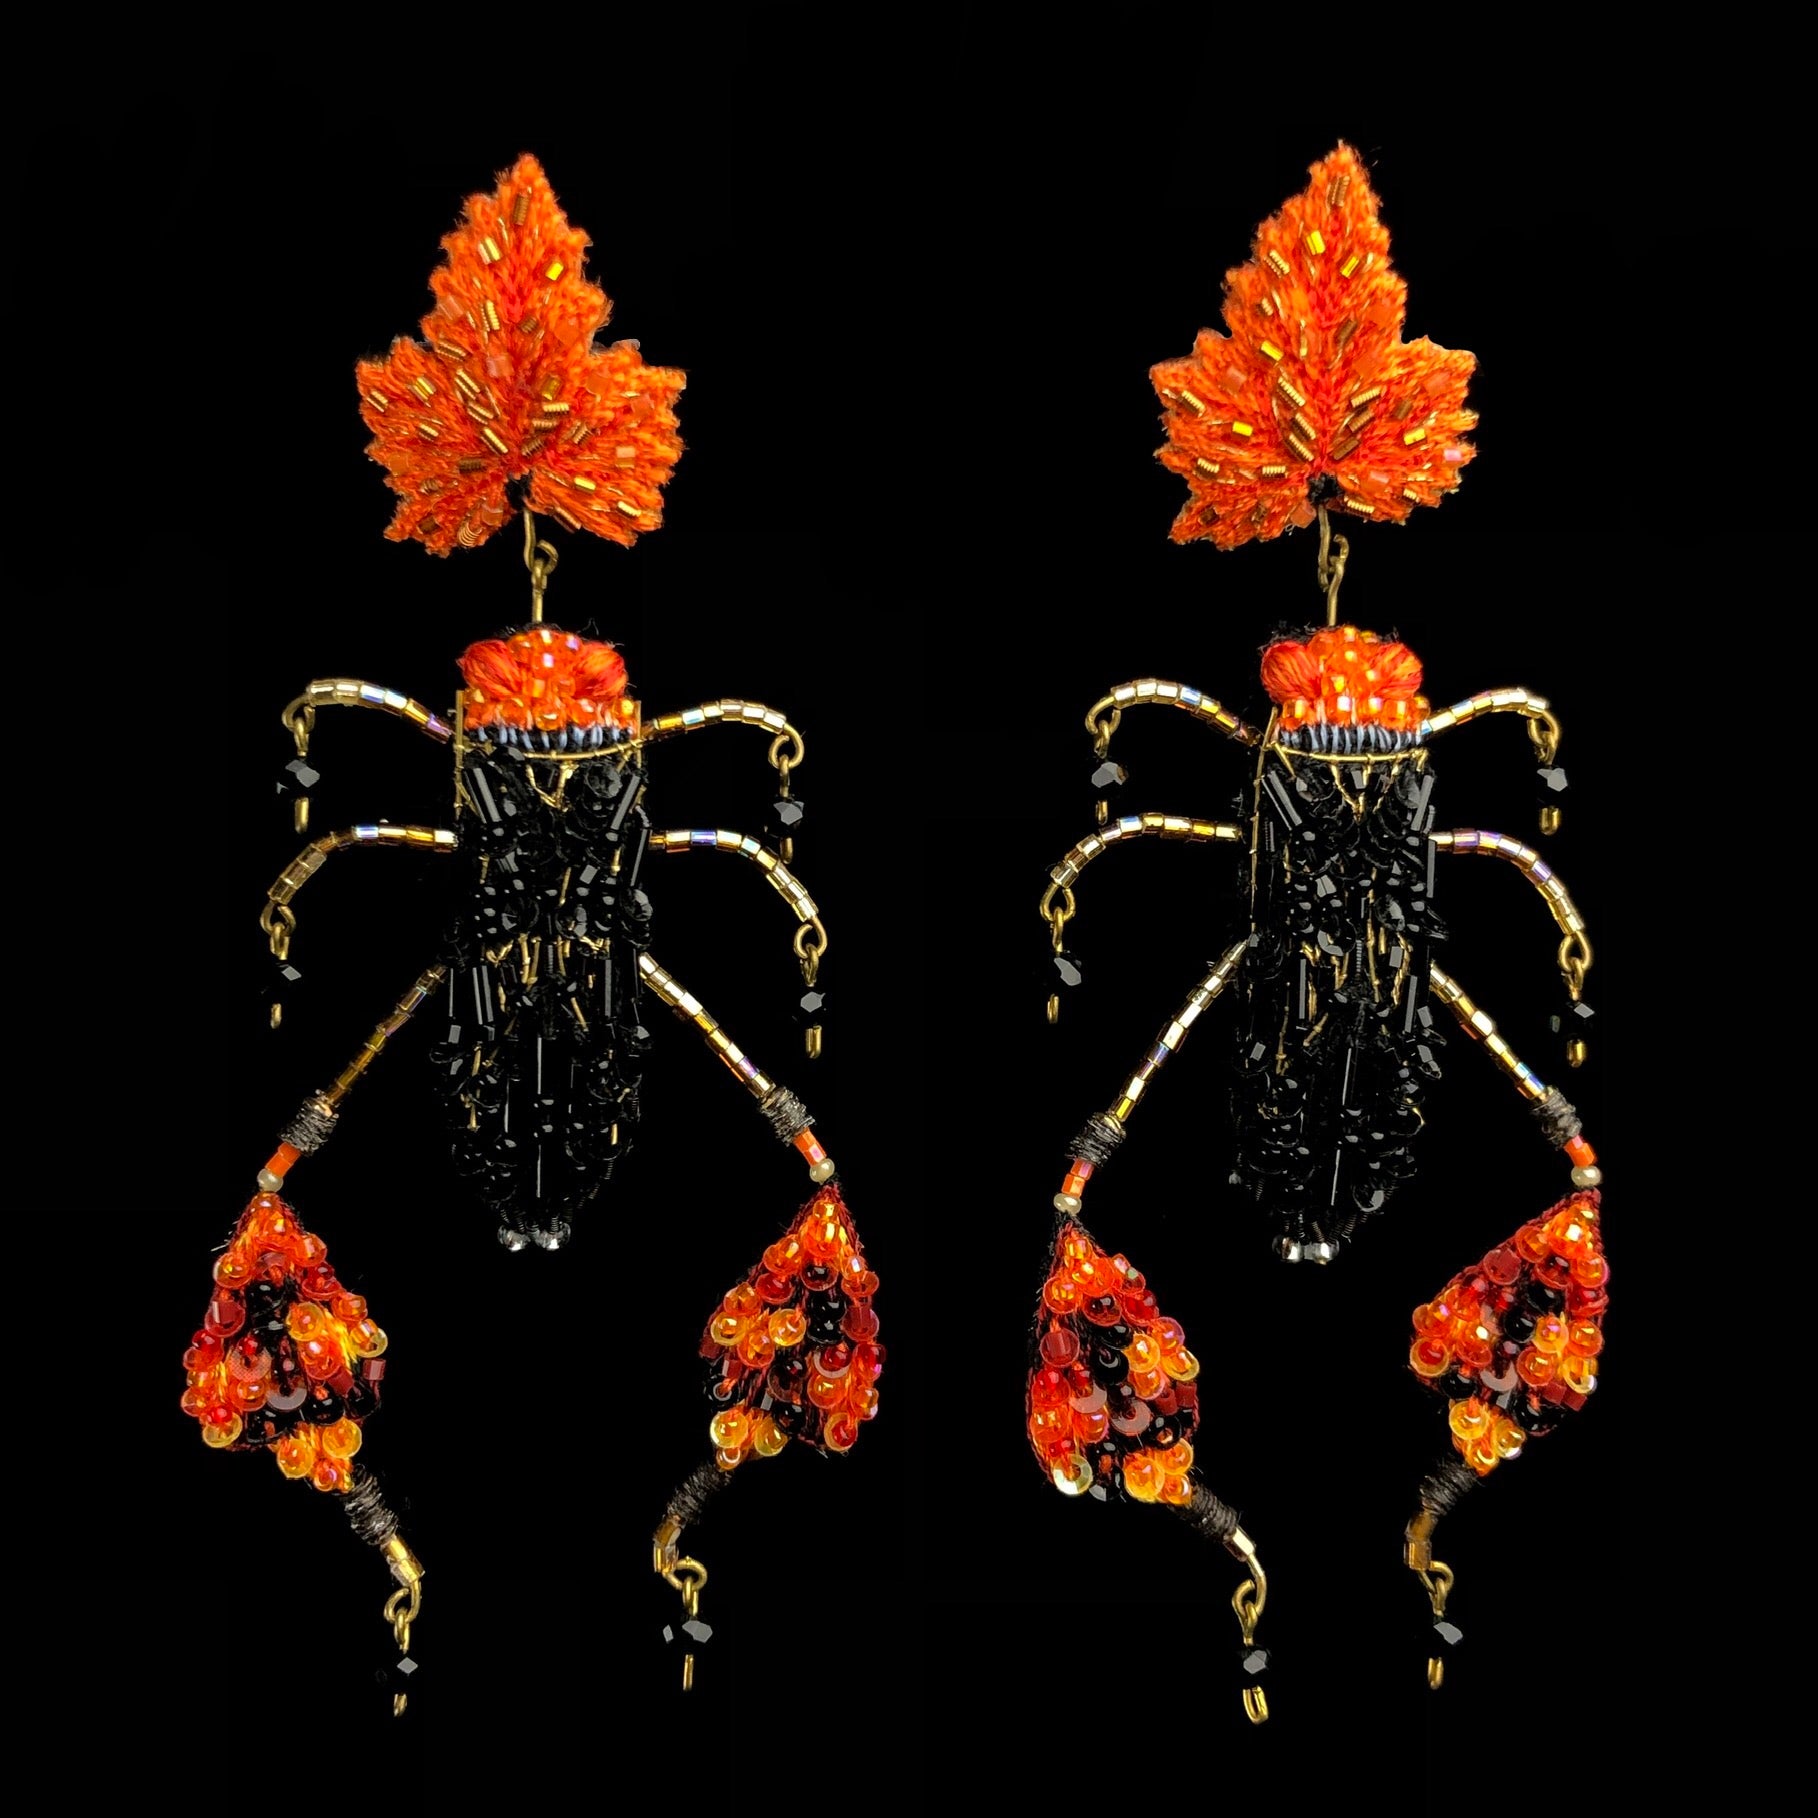 Embroidered black and orange beetles with reflective sequins and glass beads